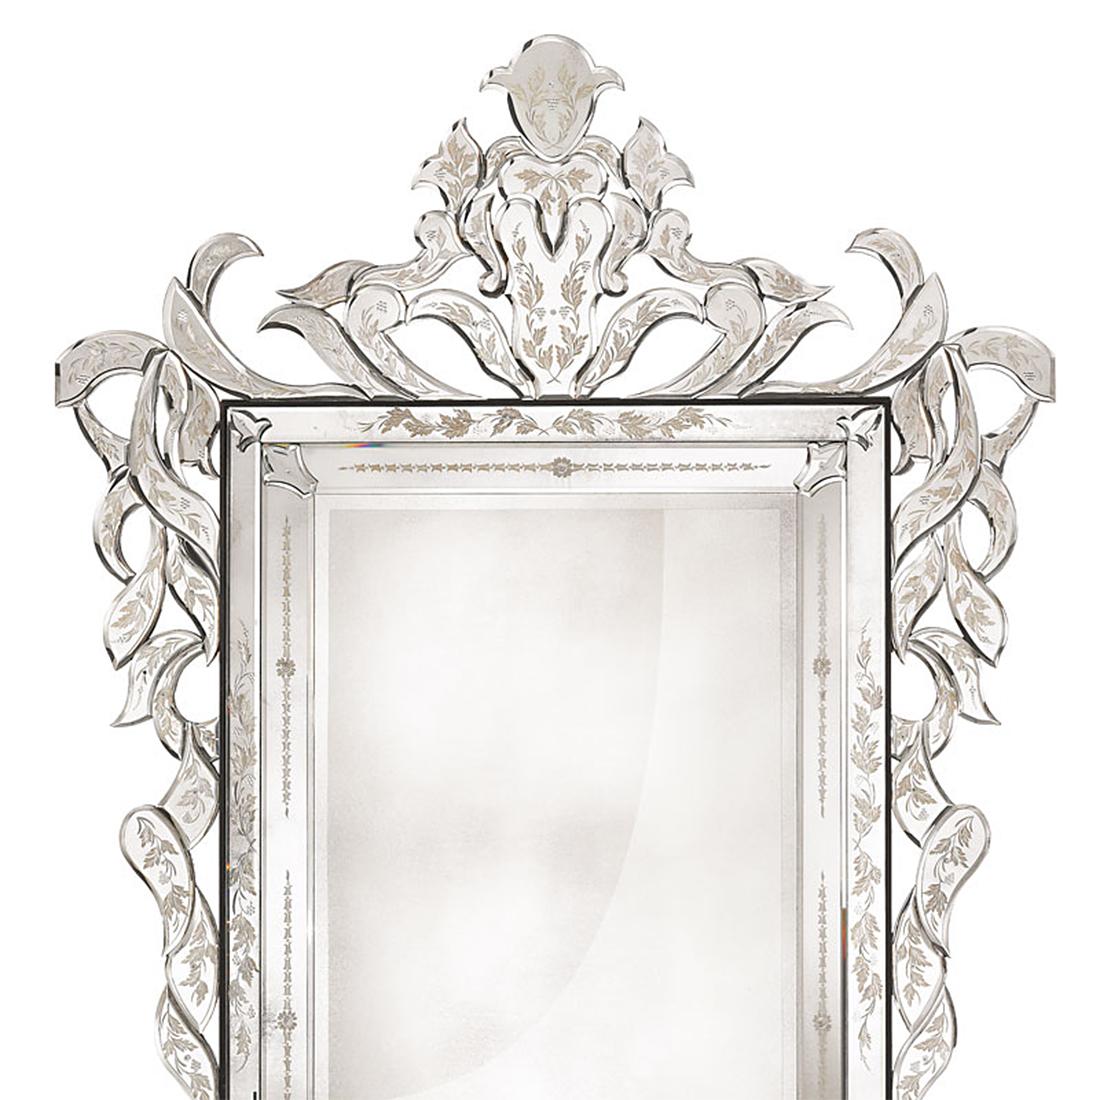 Mirror Soprano with structure in solid wood
and with handmade and engraved and 
bevelled antique mirrored glass. In the 
style of Louis XIV. Exceptional piece.